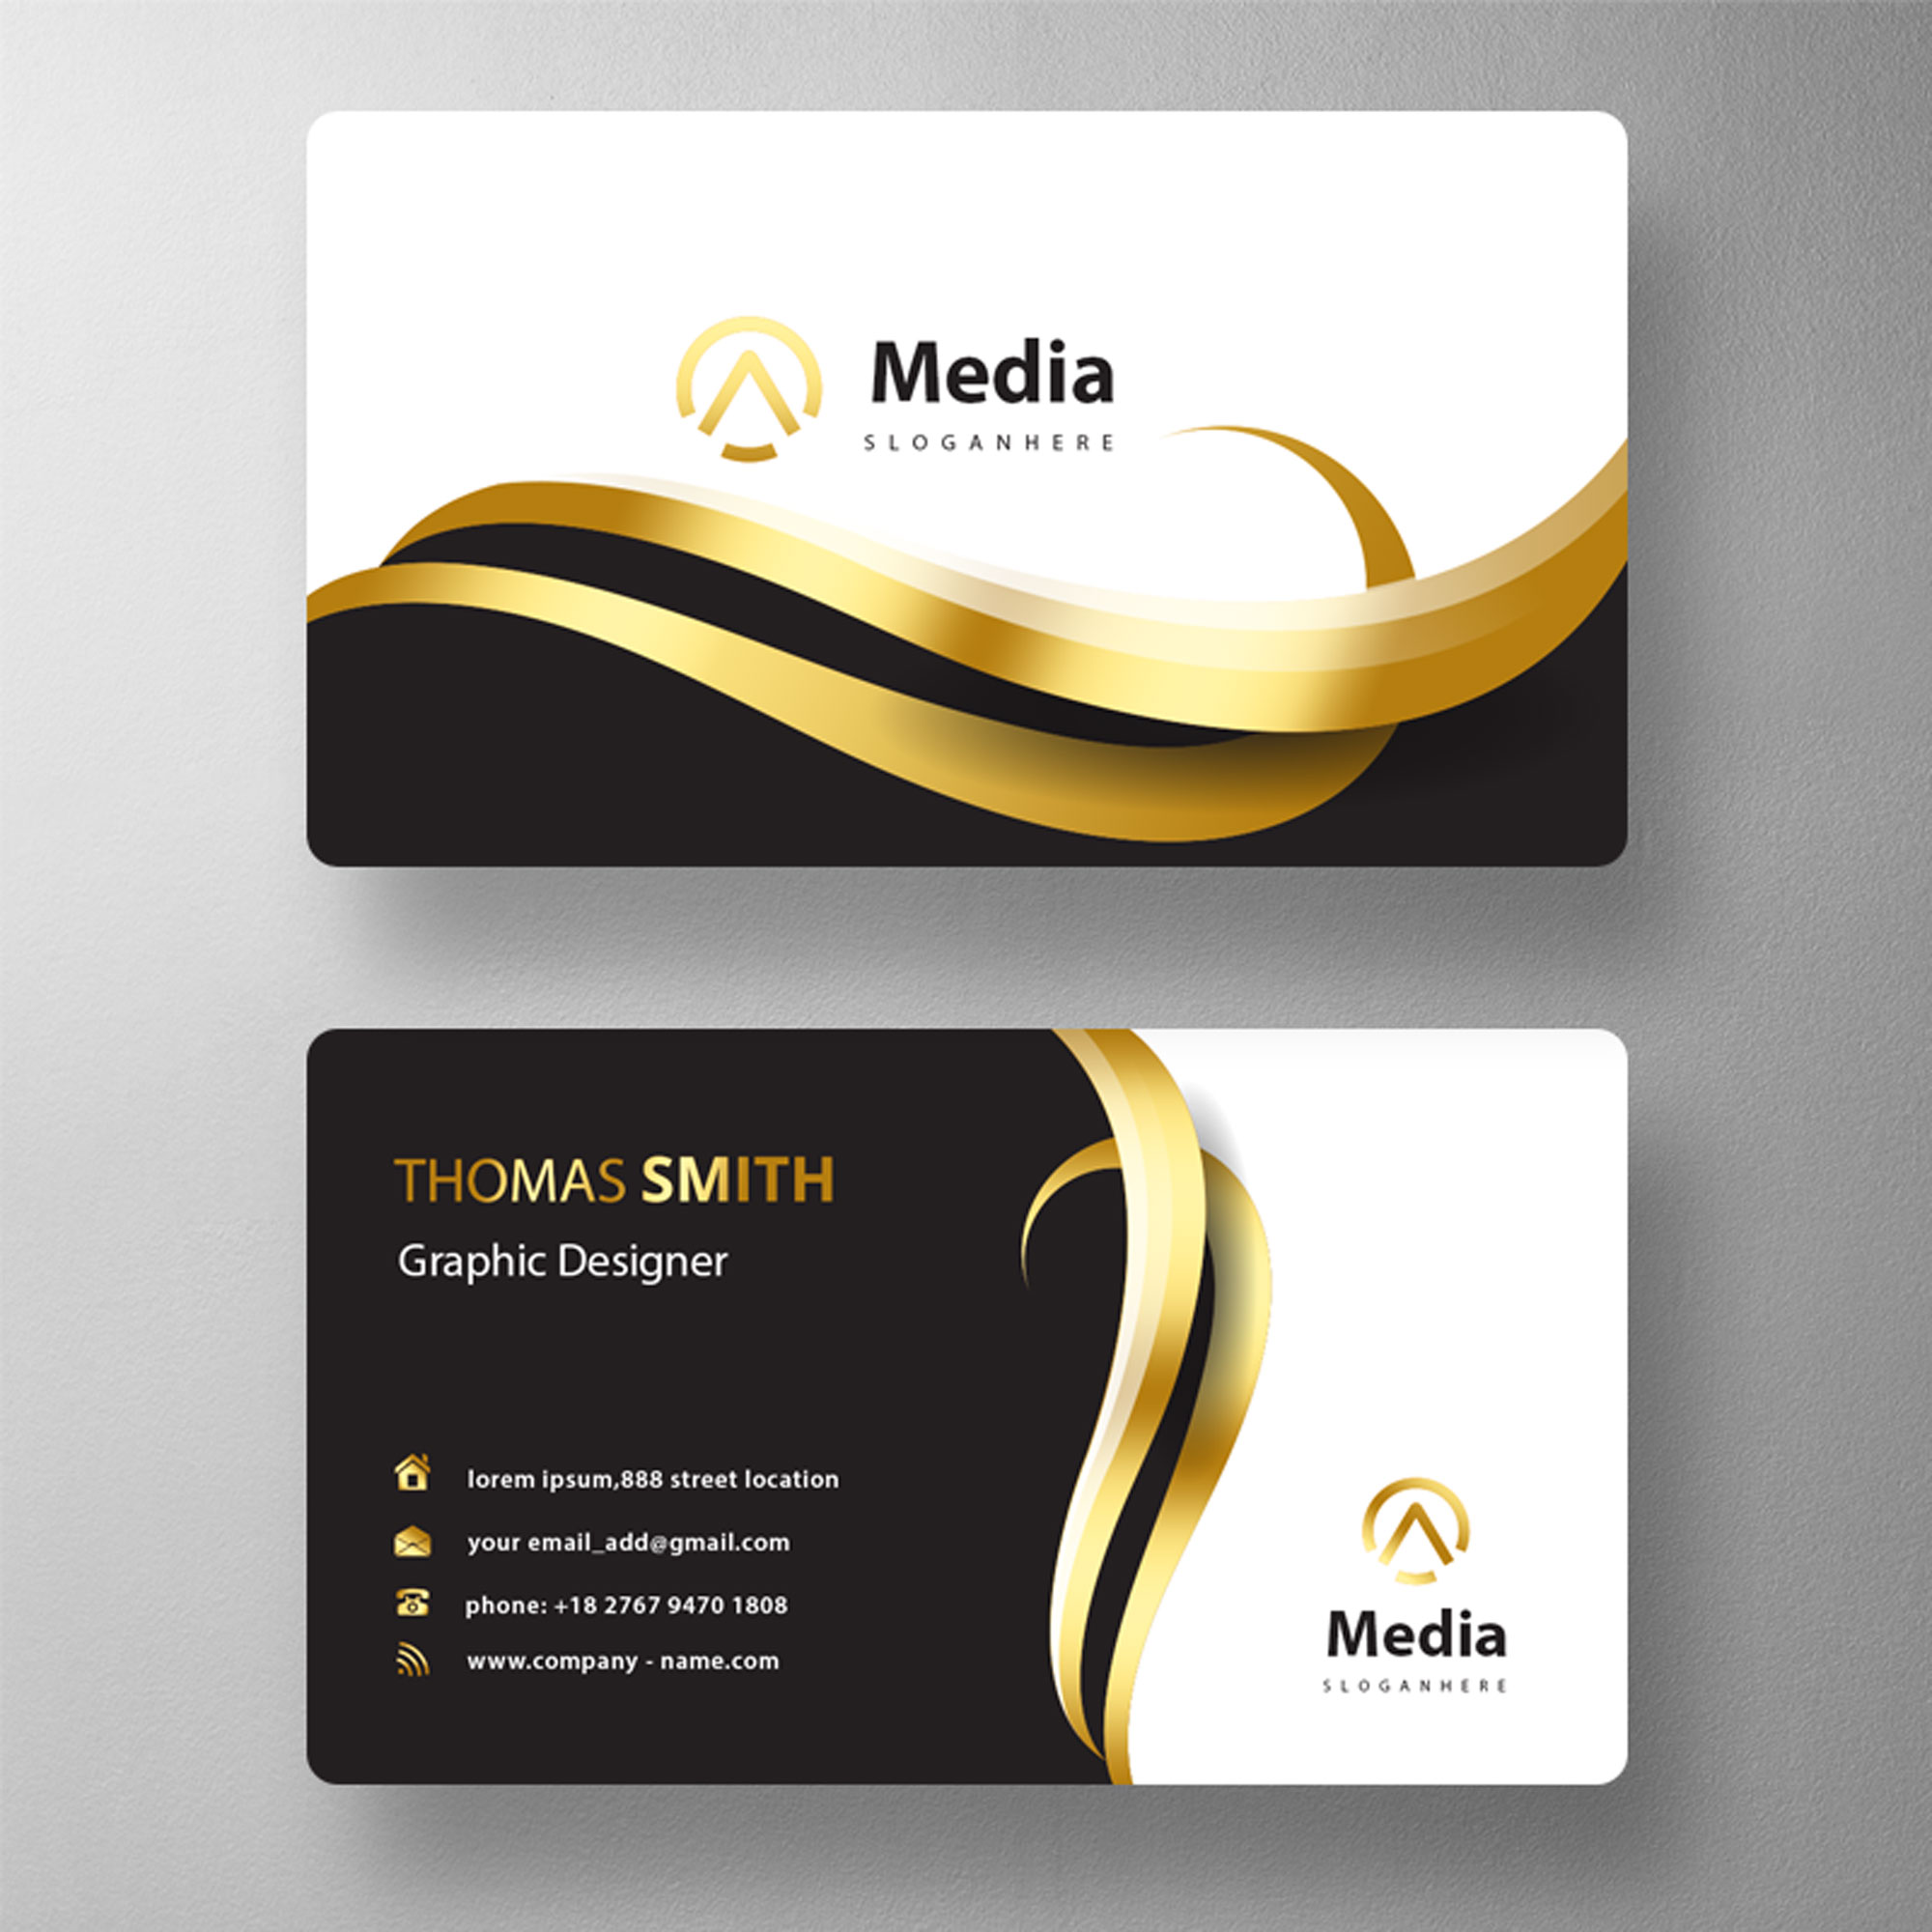 Modern Business Cards cover image.